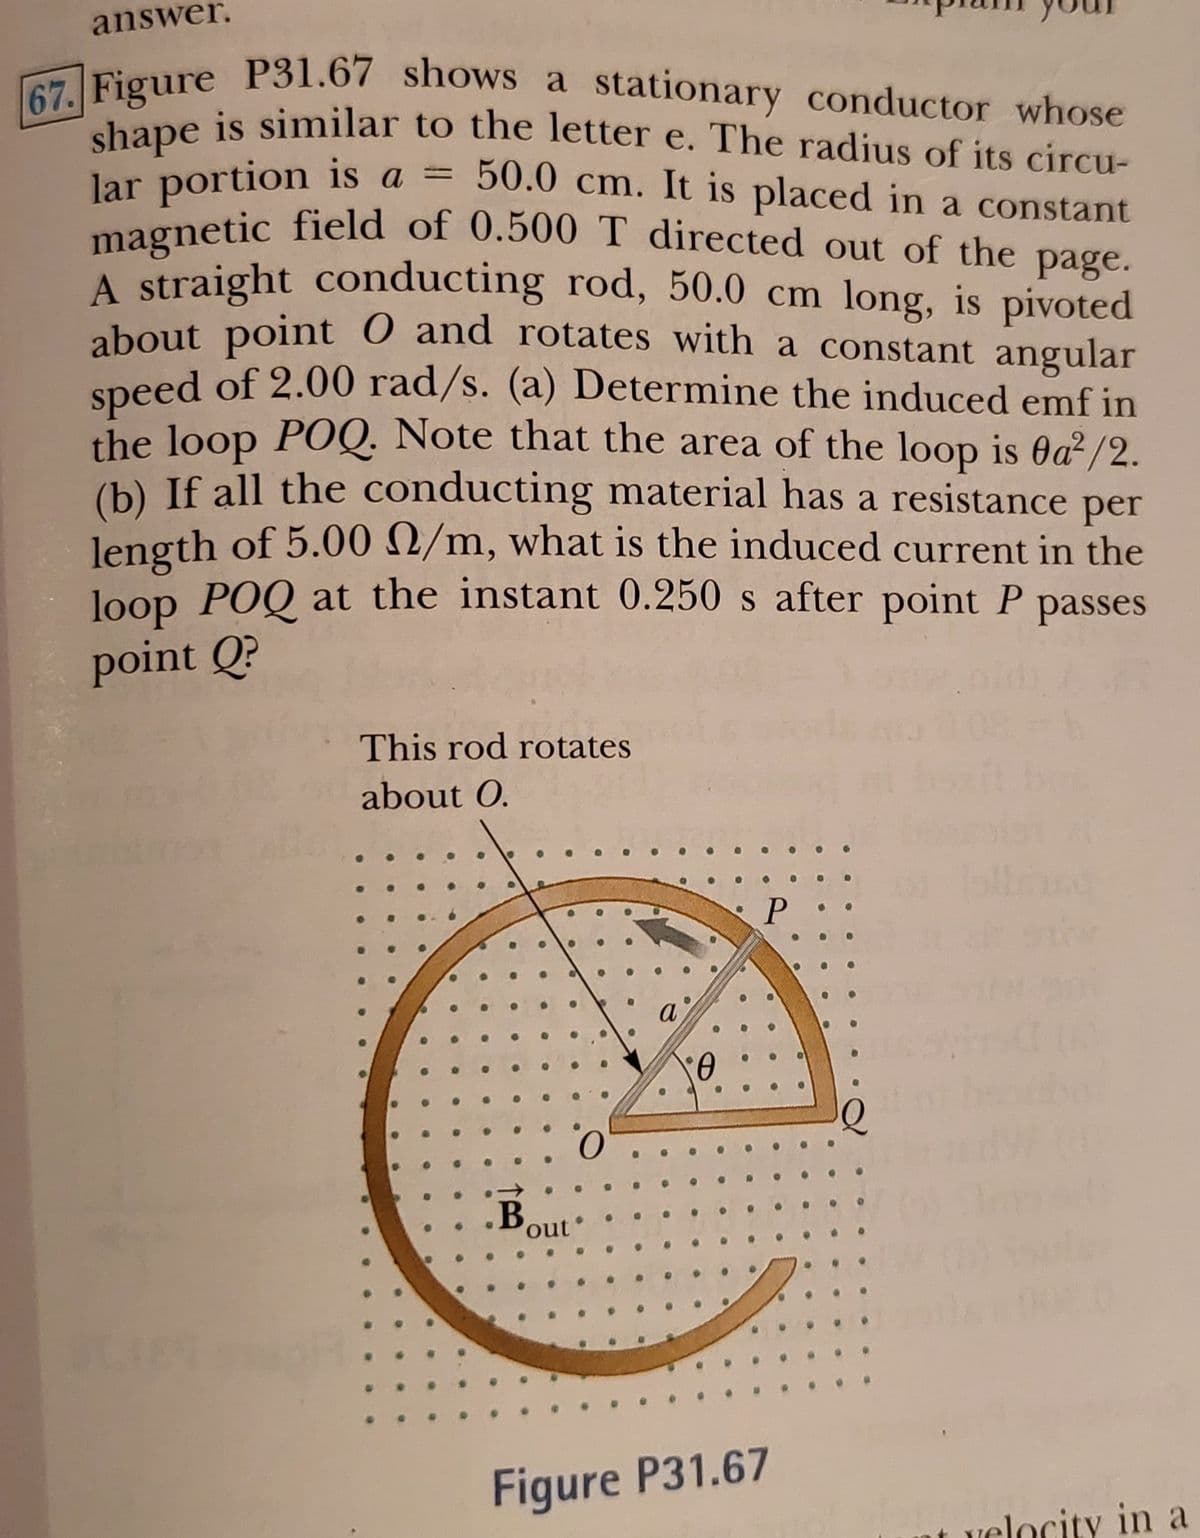 answer.
67. Figure P31.67 shows a stationary conductor whose
magnetic field of 0.500 T directed out of the page.
Figure P31.67 shows a stationary conductor whose
shape is similar to the letter e. The radius of its circu-
lar portion is a =
magnetic field of 0.500 T directed out of the
A straight conducting rod, 50.0 cm long, is pivoted
about point 0 and rotates with a constant angular
speed of 2.00 rad/s. (a) Determine the induced emf in
the loop POQ. Note that the area of the loop is Oa²/2.
(b) If all the conducting material has a resistance per
length of 5.00 2/m, what is the induced current in the
loop POQ at the instant 0.250 s after point P passes
50.0 cm. It is placed in a constant
%3D
page.
point Q?
This rod rotates
about O.
•B
out
Figure P31.67
velocity in a
